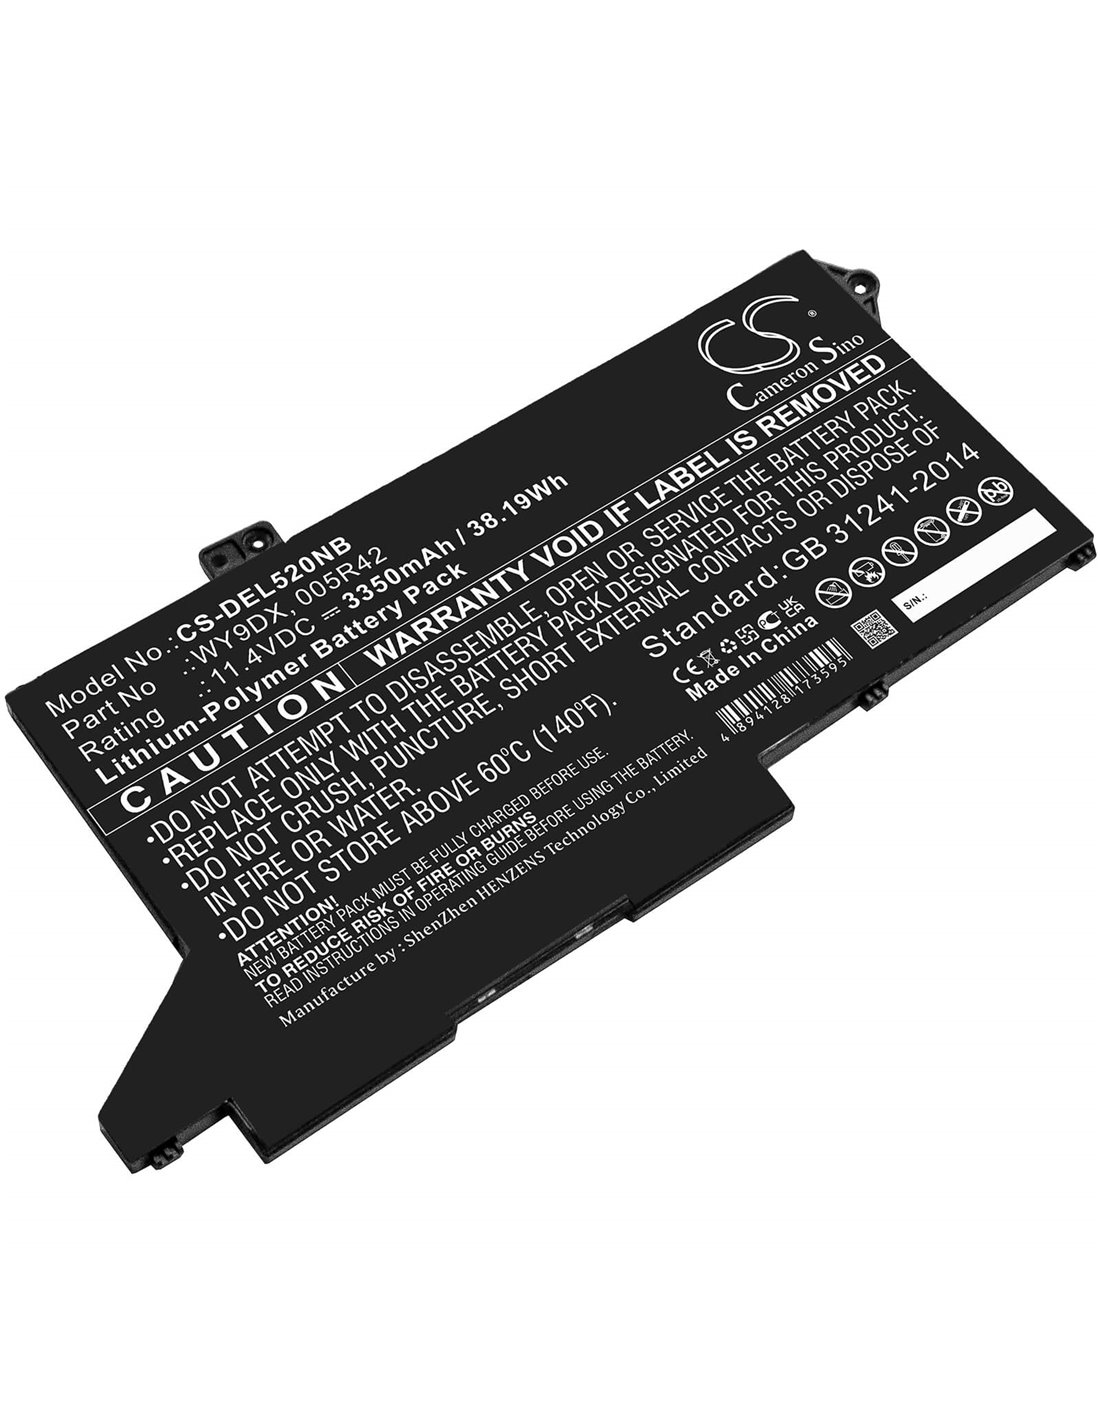 Dell, Latitude 5420, Latitude 5520 Replacement Battery shipped from Canada